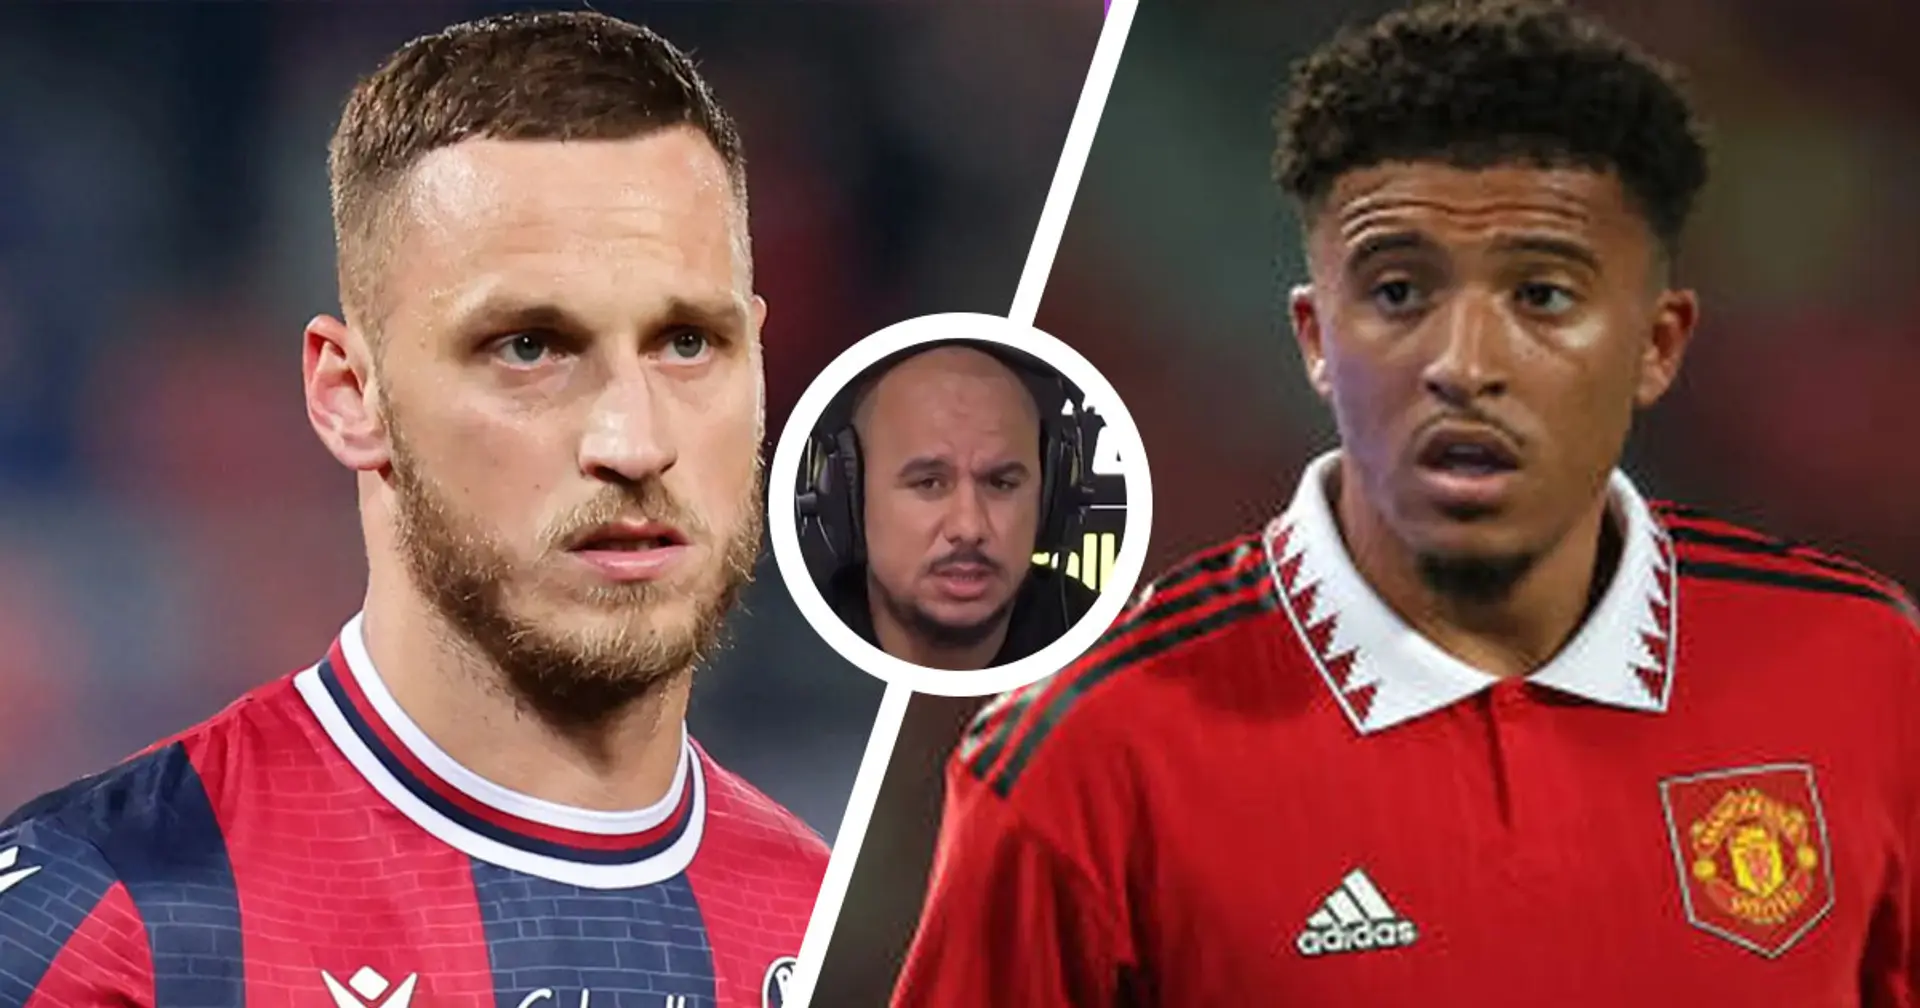 ‘I’d rather have him than Sancho’: Gabby Agbonlahor slams United fans for derailing Arnautovic move